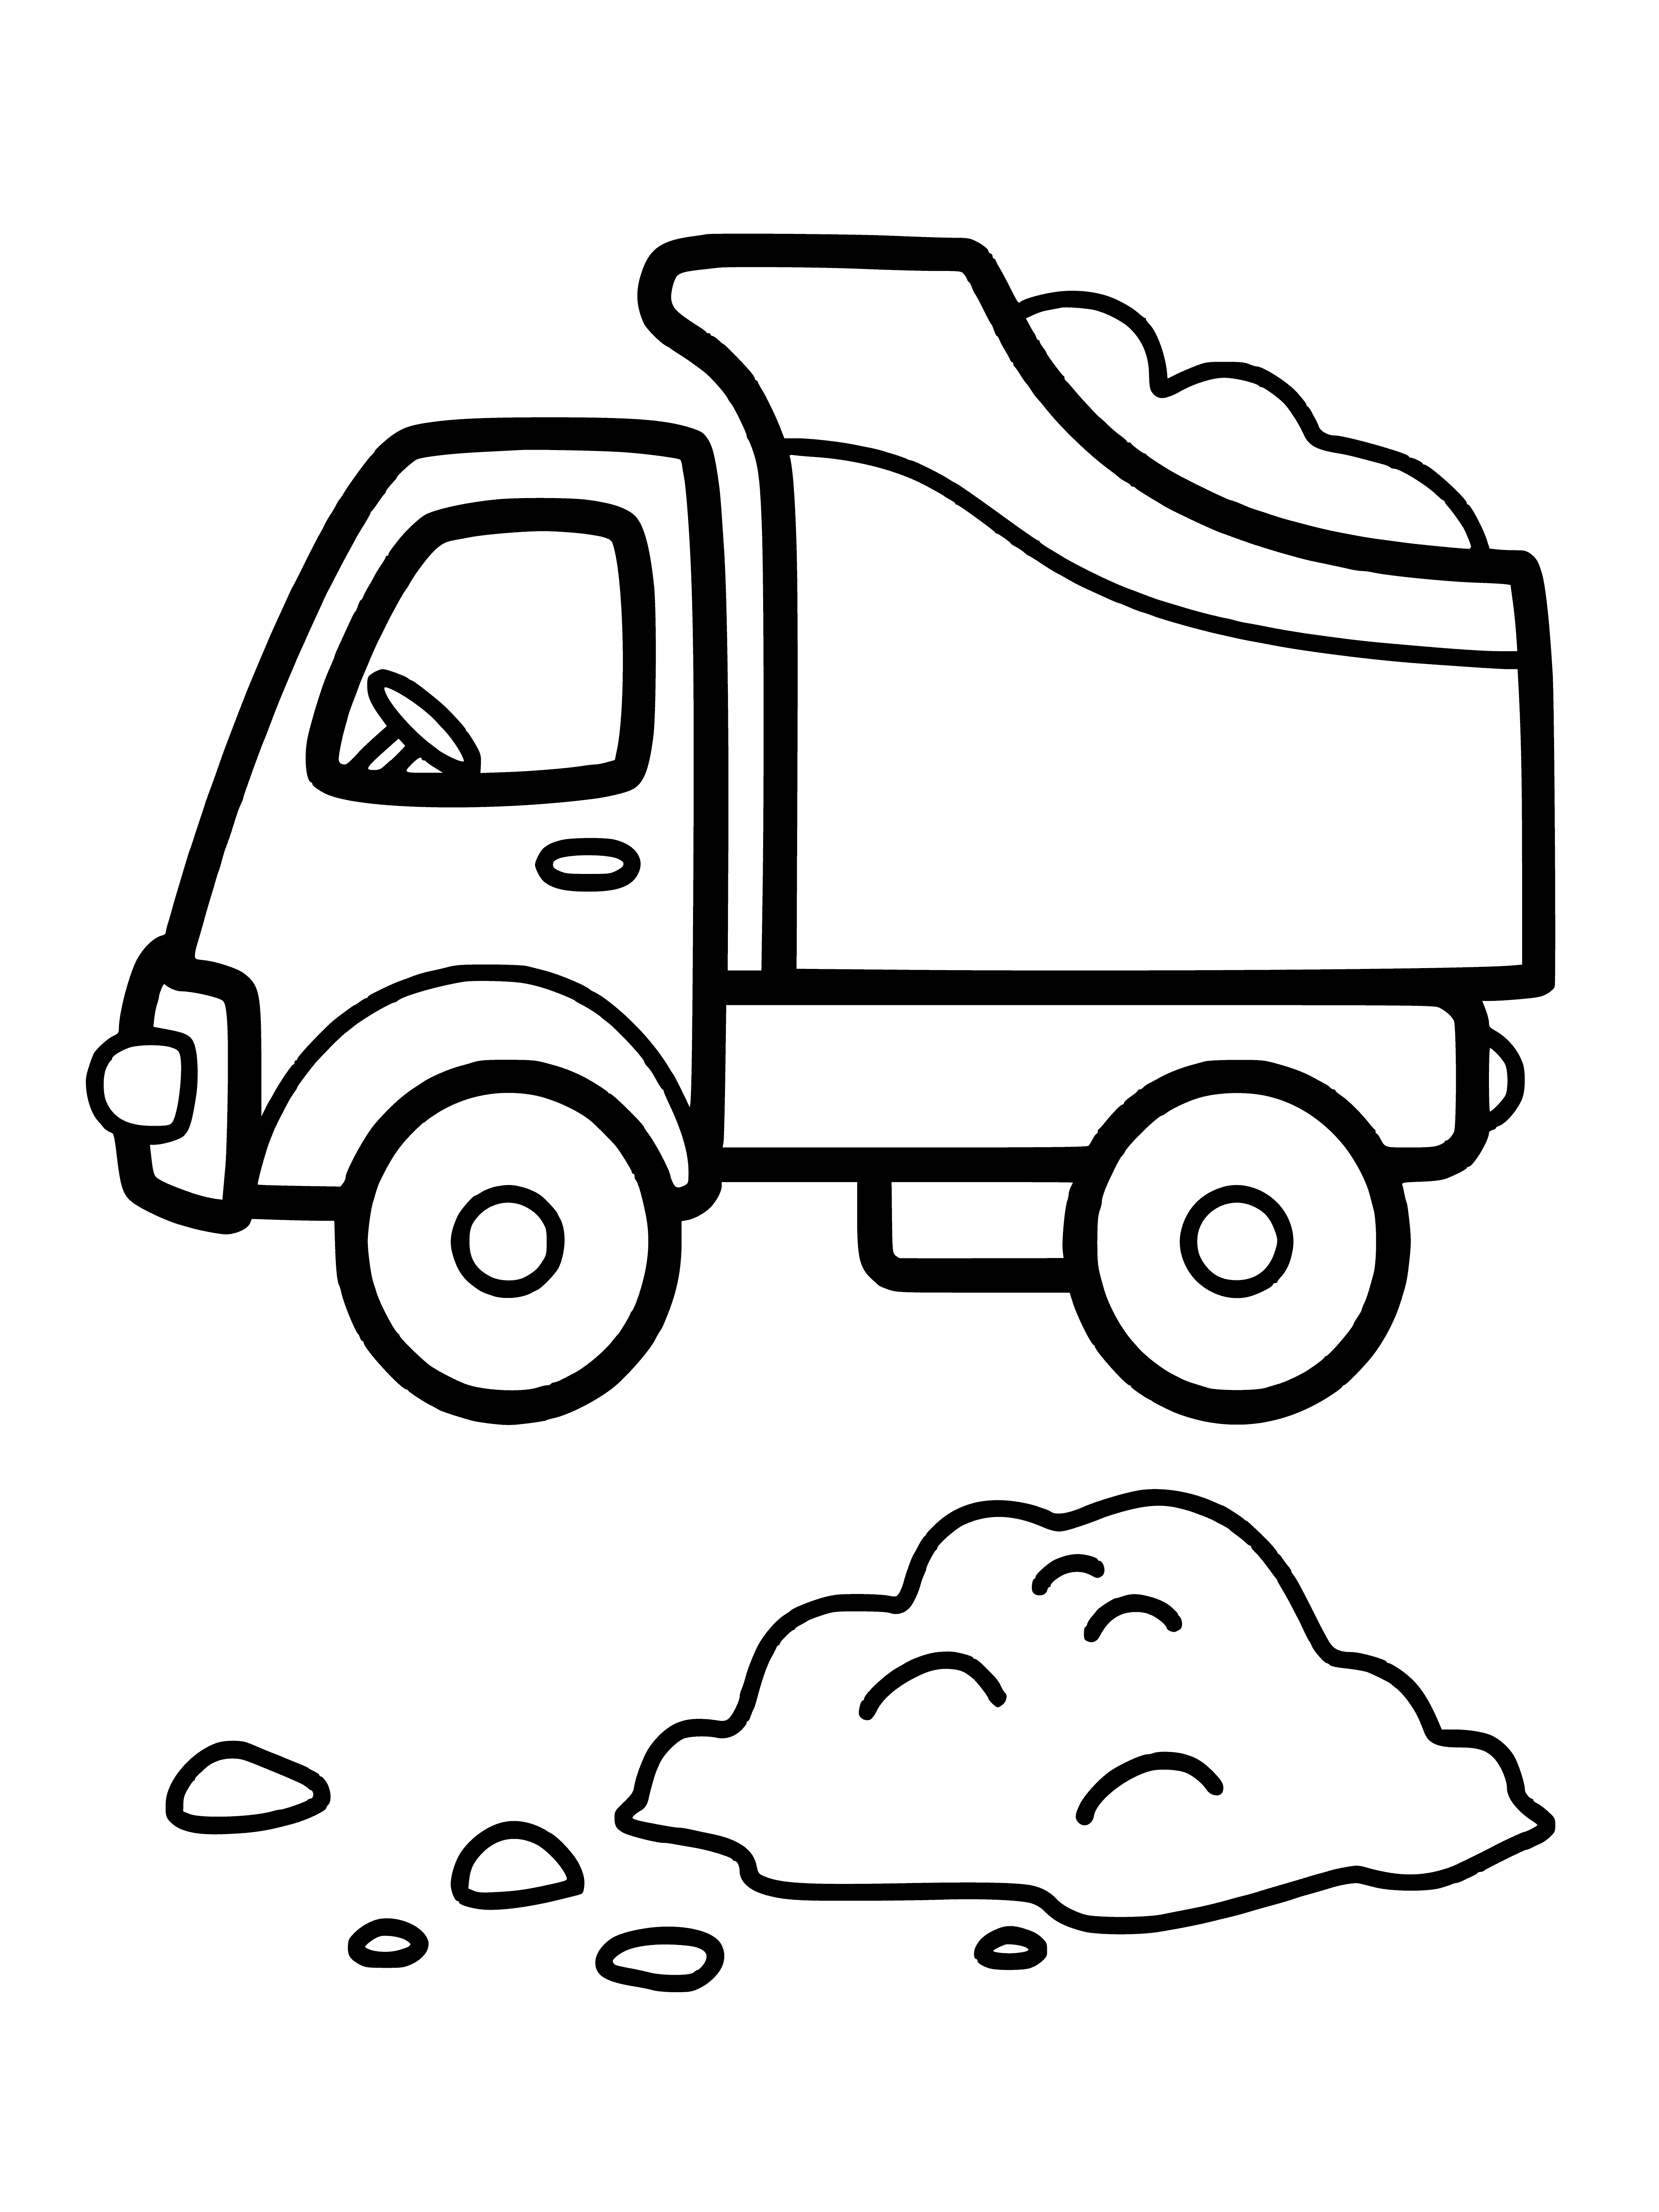 coloring page: A red truck with a white bed, four wheels and a black bumper, parked in a driveway.